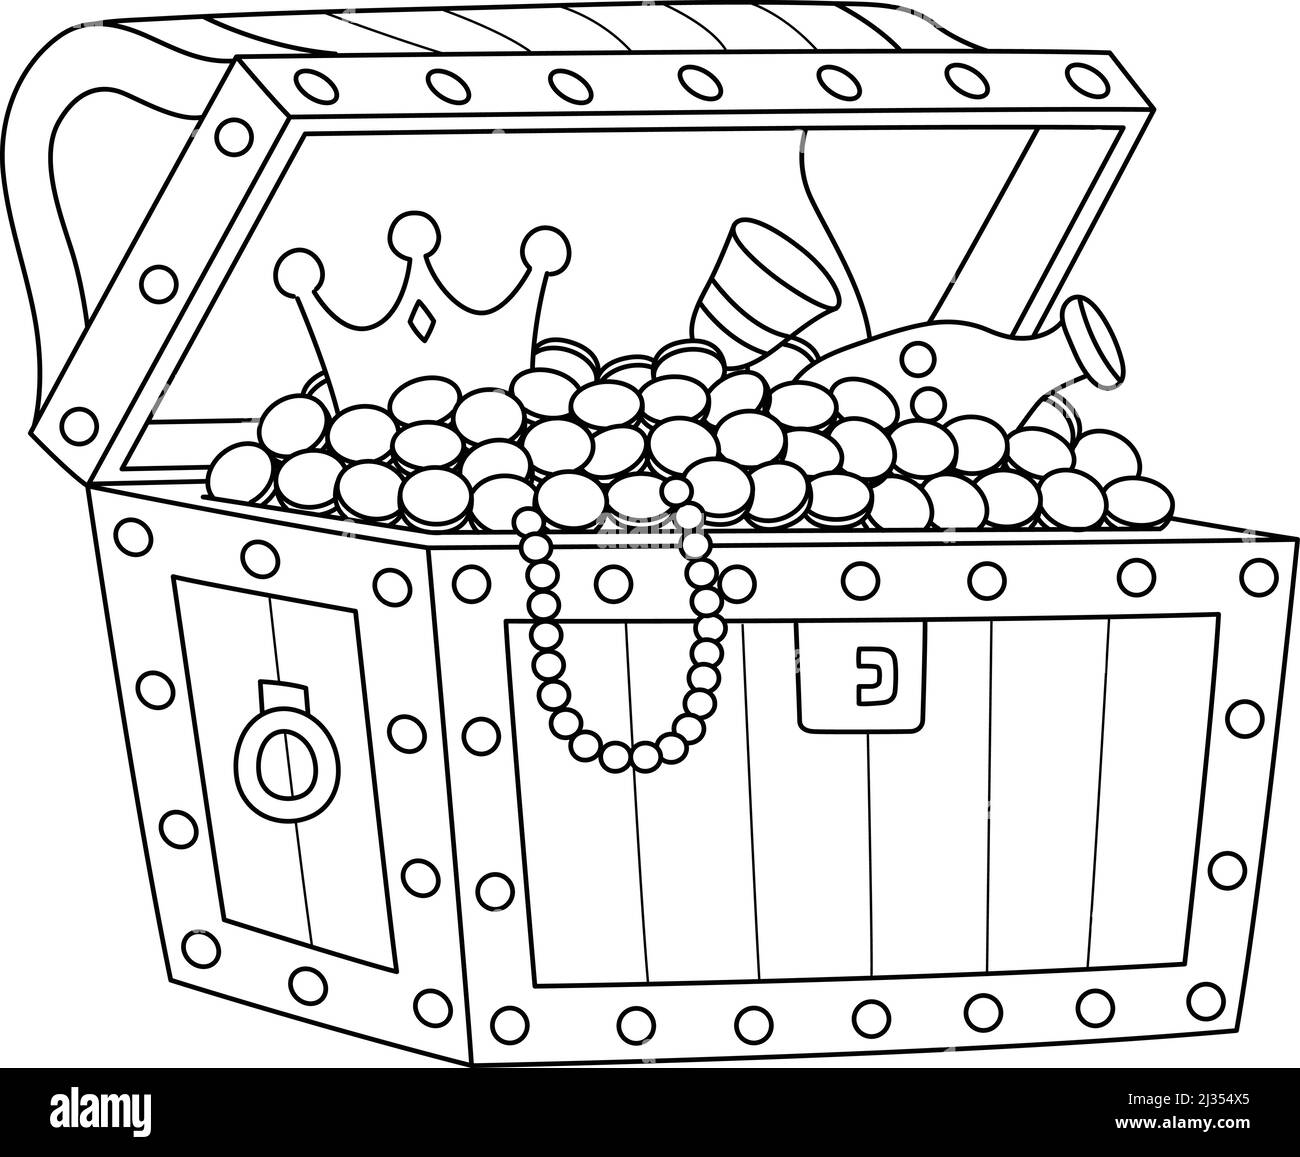 Big treasure chest coloring page isolated for kids stock vector image art